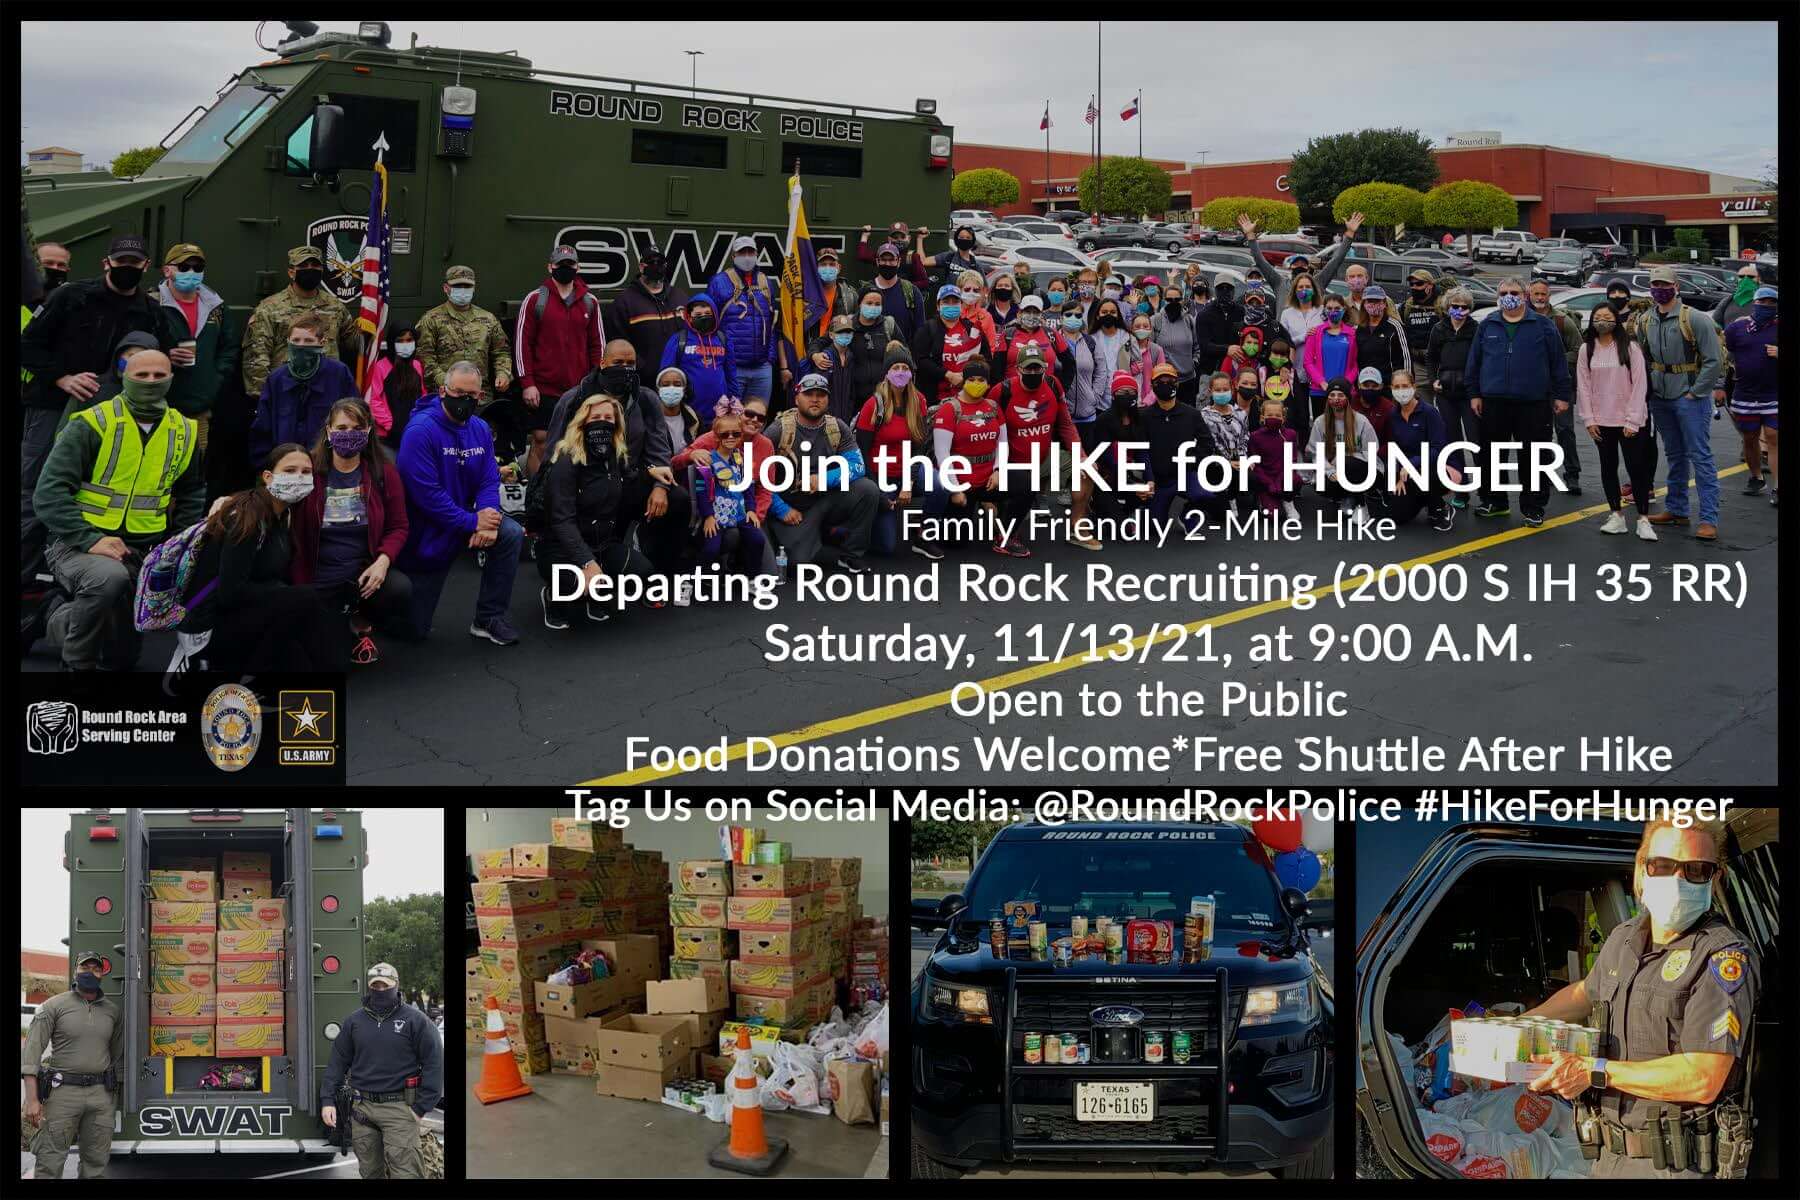 Hike for Hunger with RRPD and US Army | November 13, 2021